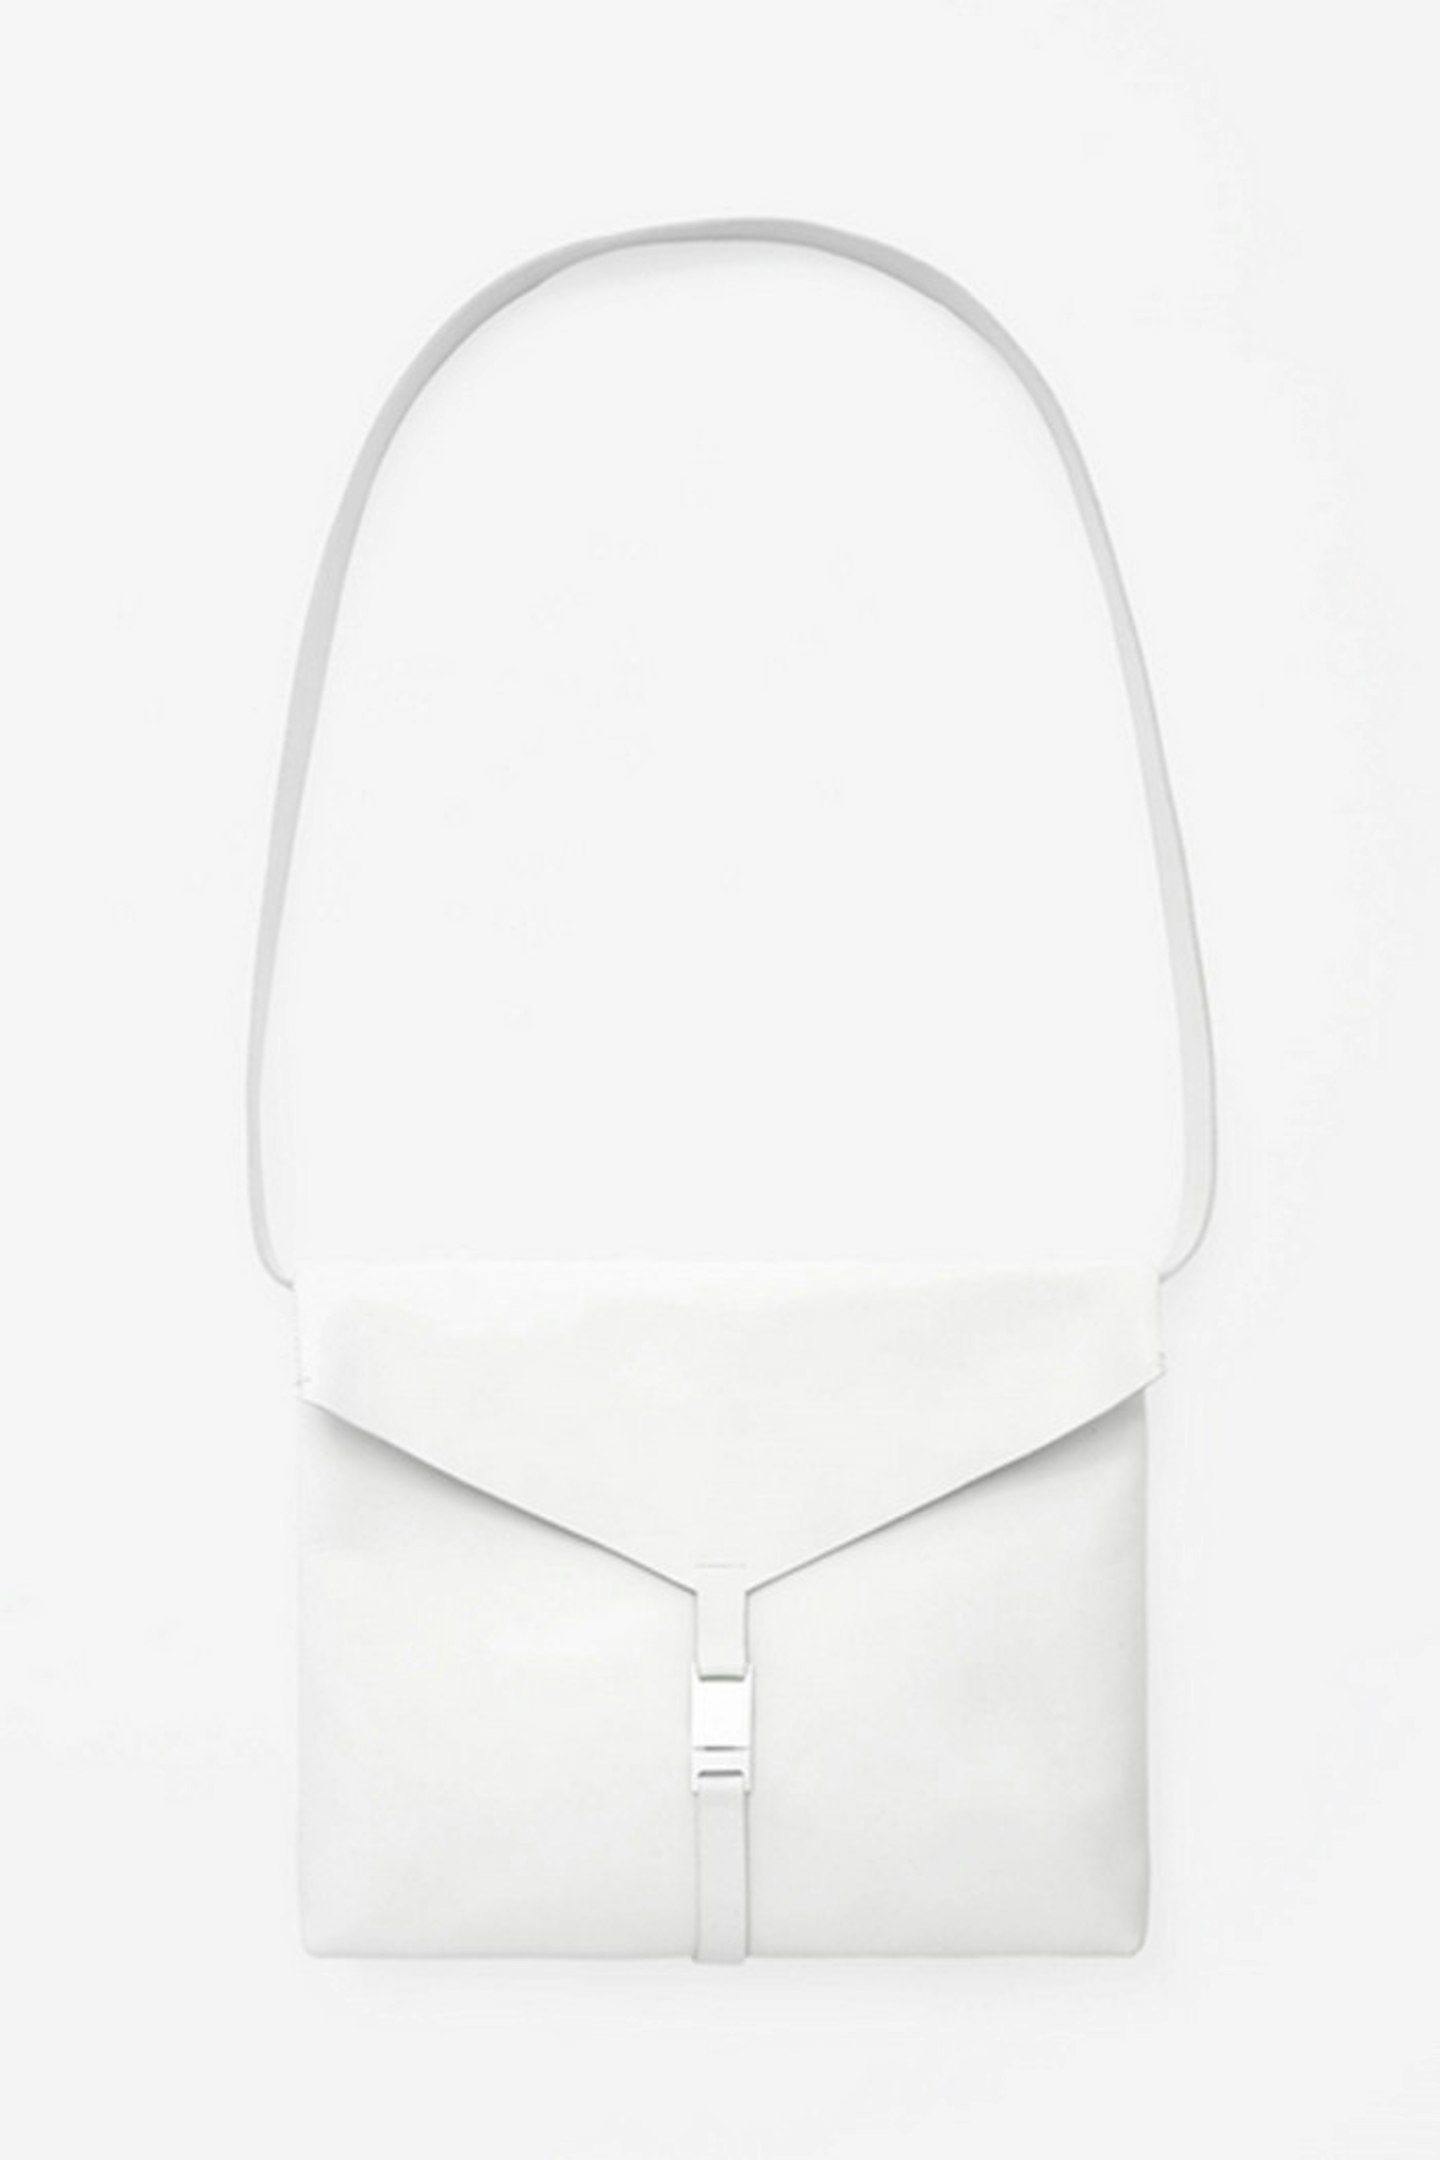 Make the most of the summer months and swap your trusty black leather handbag for this white shoulder style.